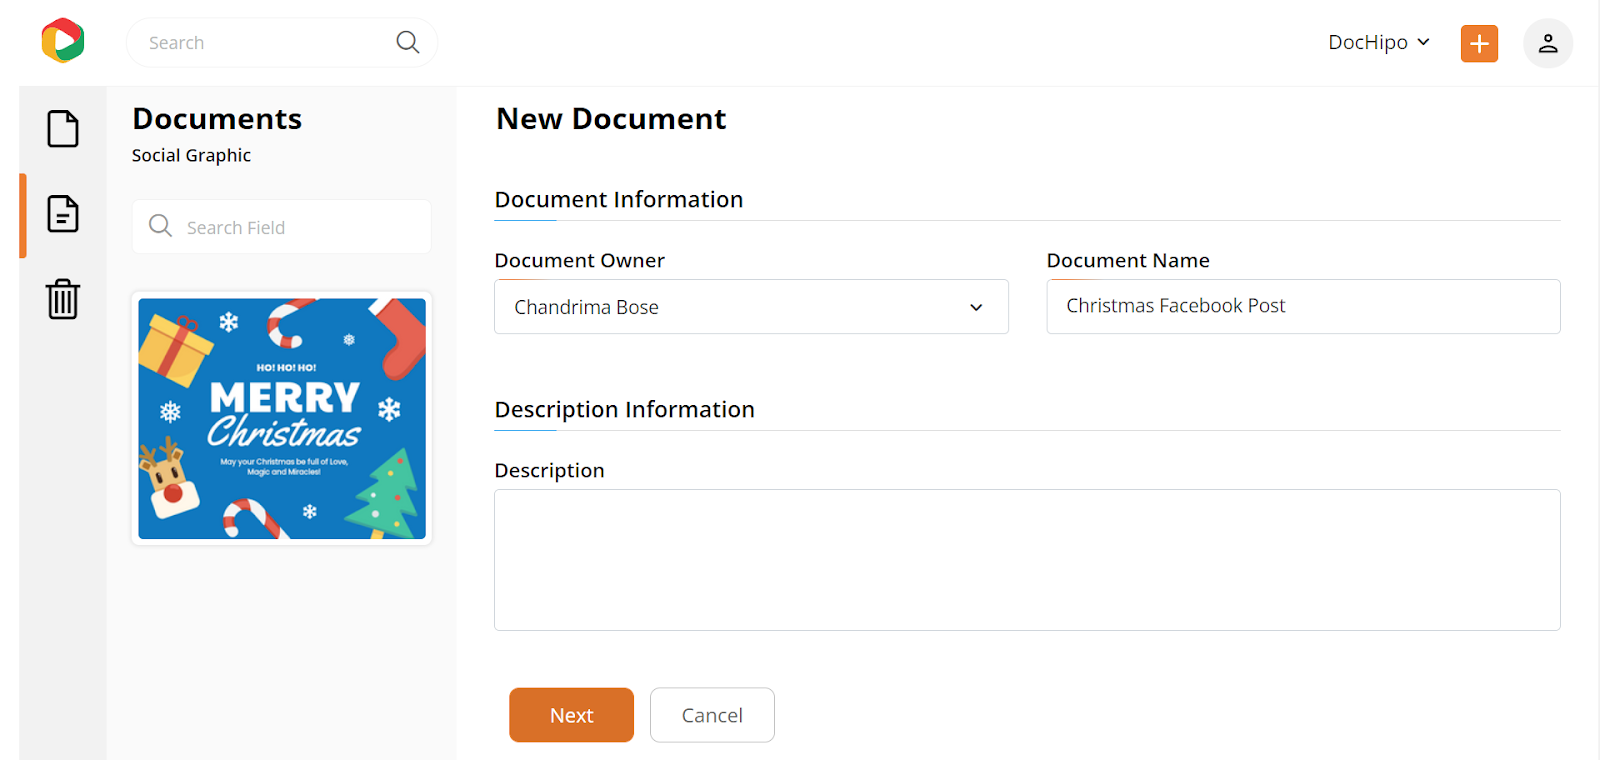 Add Document Name and Descrption